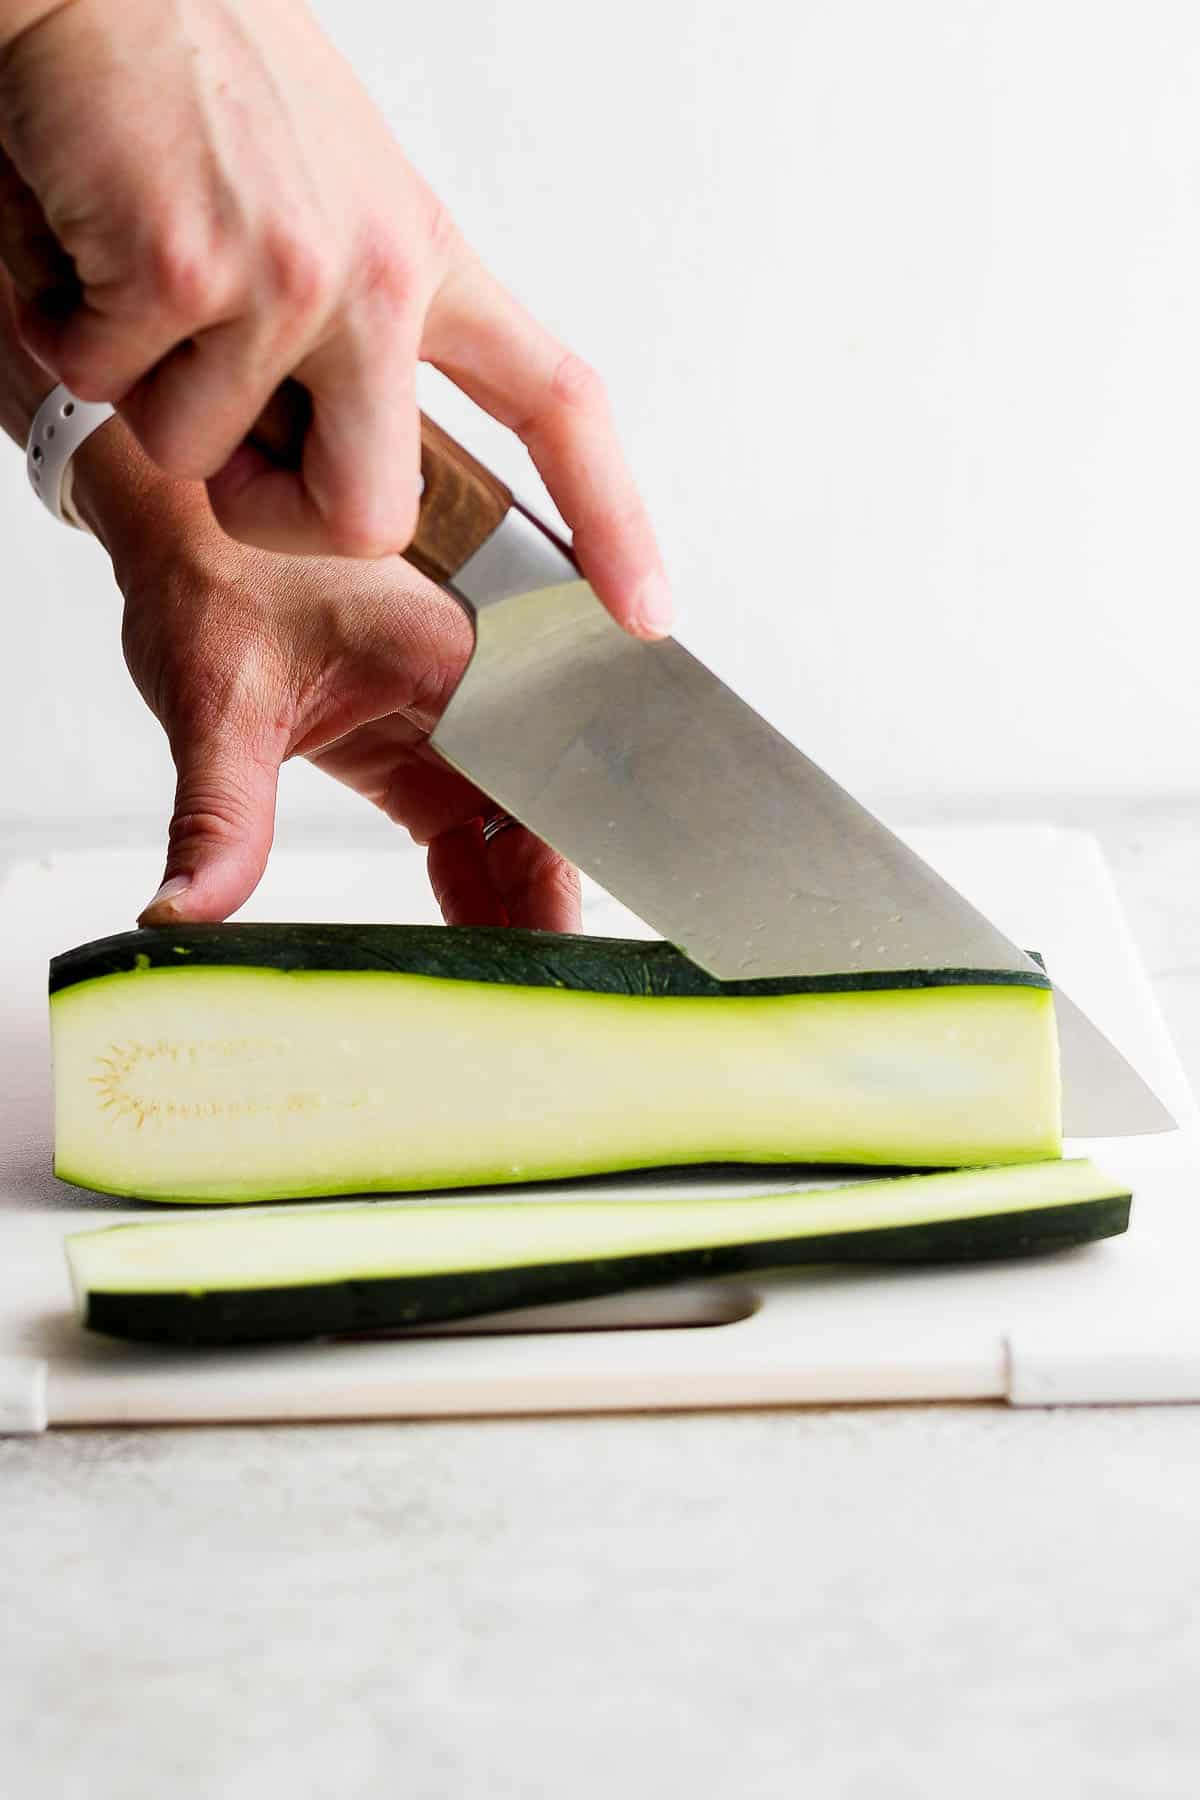 A zucchini being cut, lengthwise, into 1/2 inch slabs.